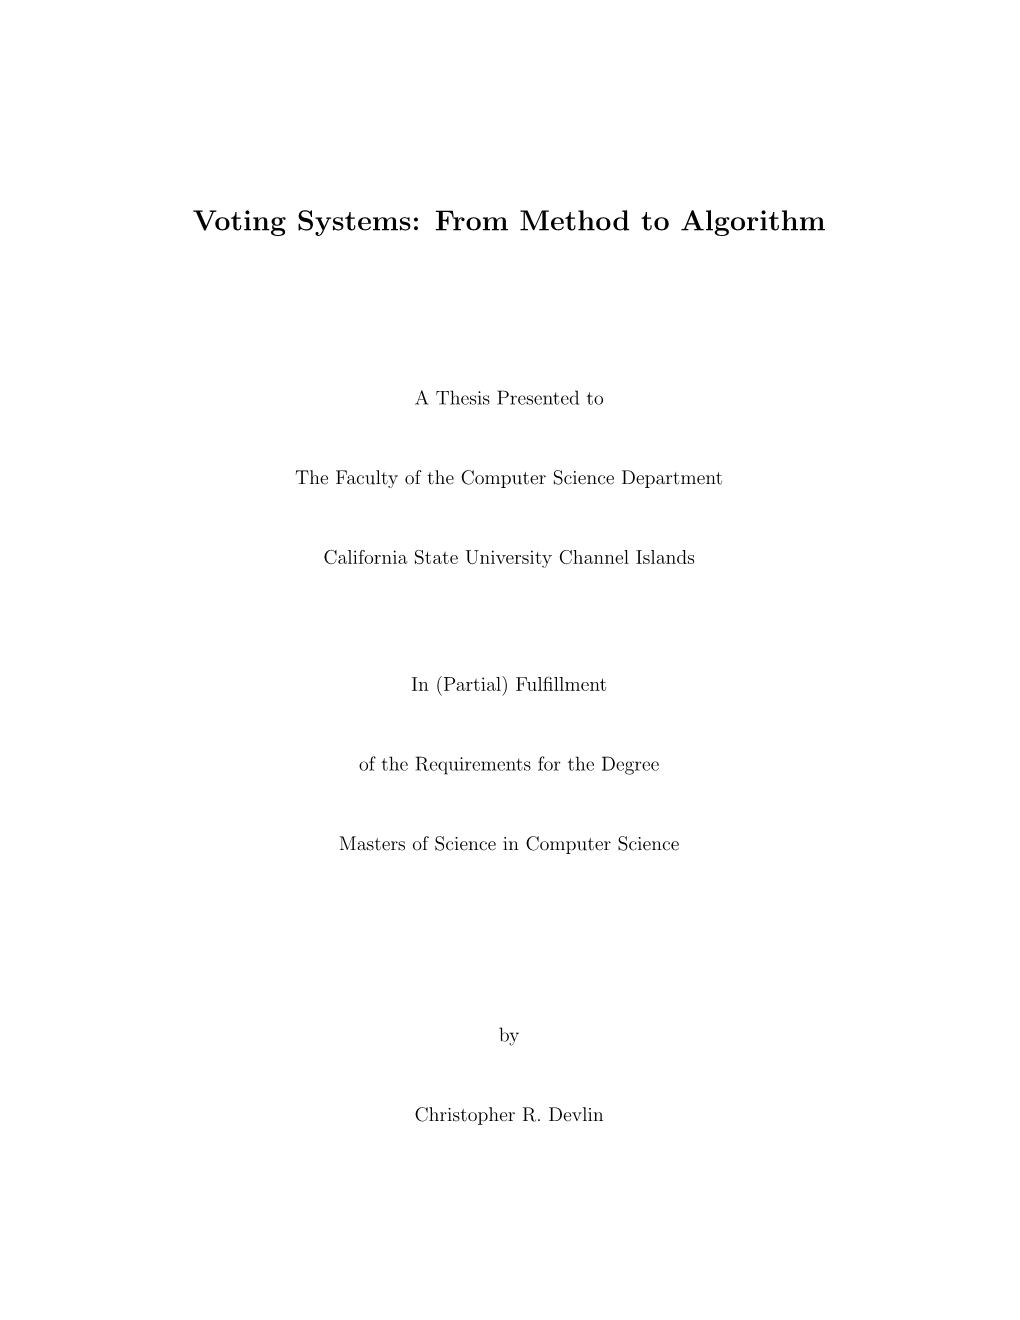 Voting Systems: from Method to Algorithm